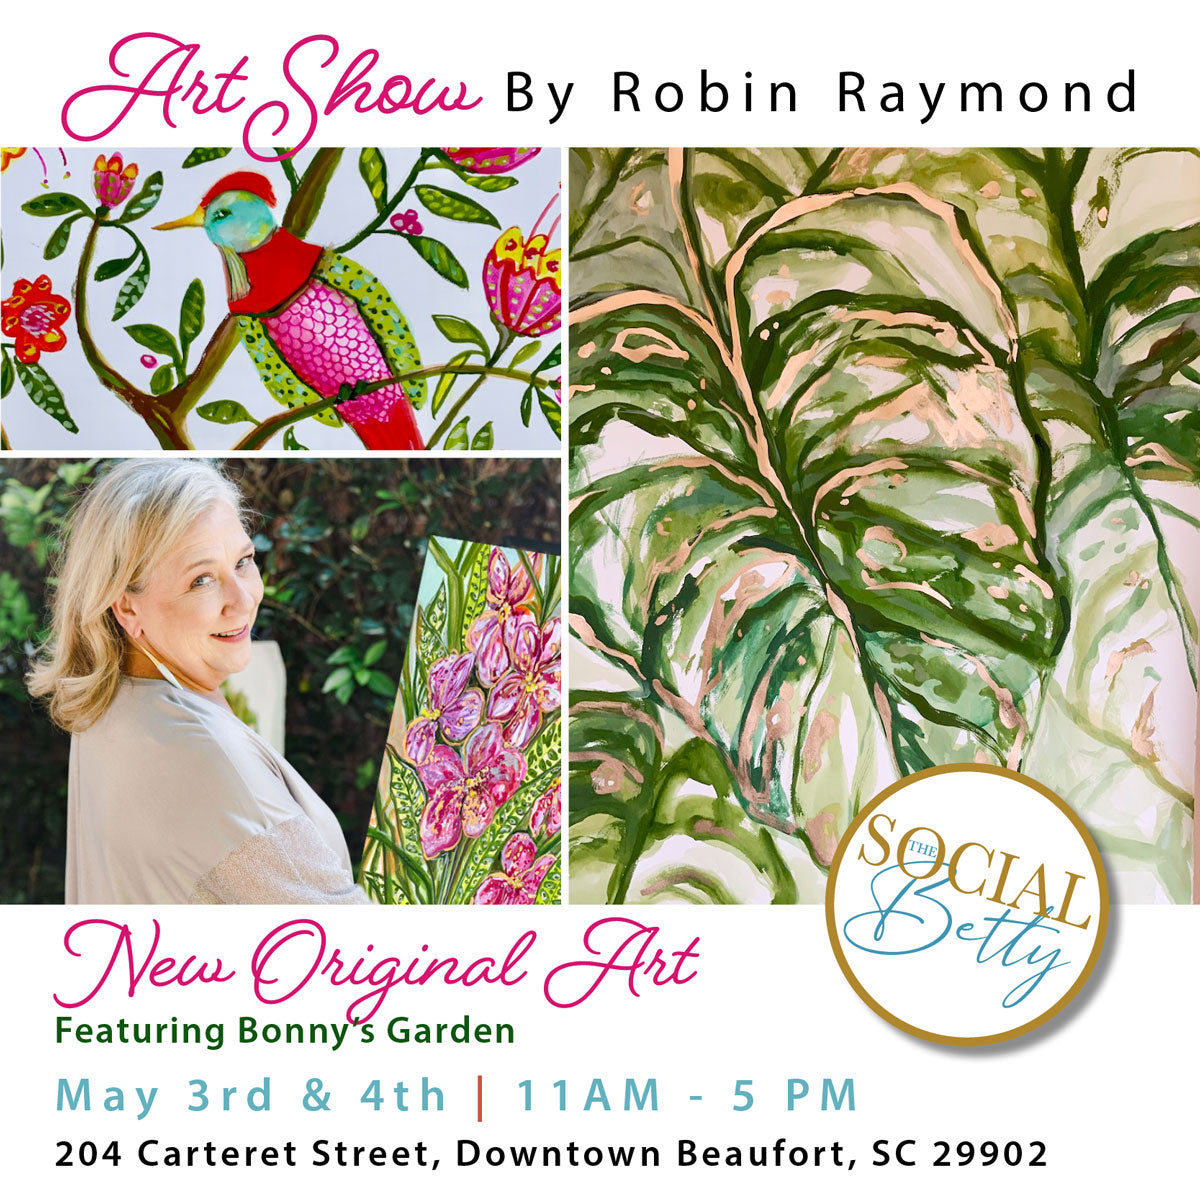 You are invited to an Art Show by Robin Raymond